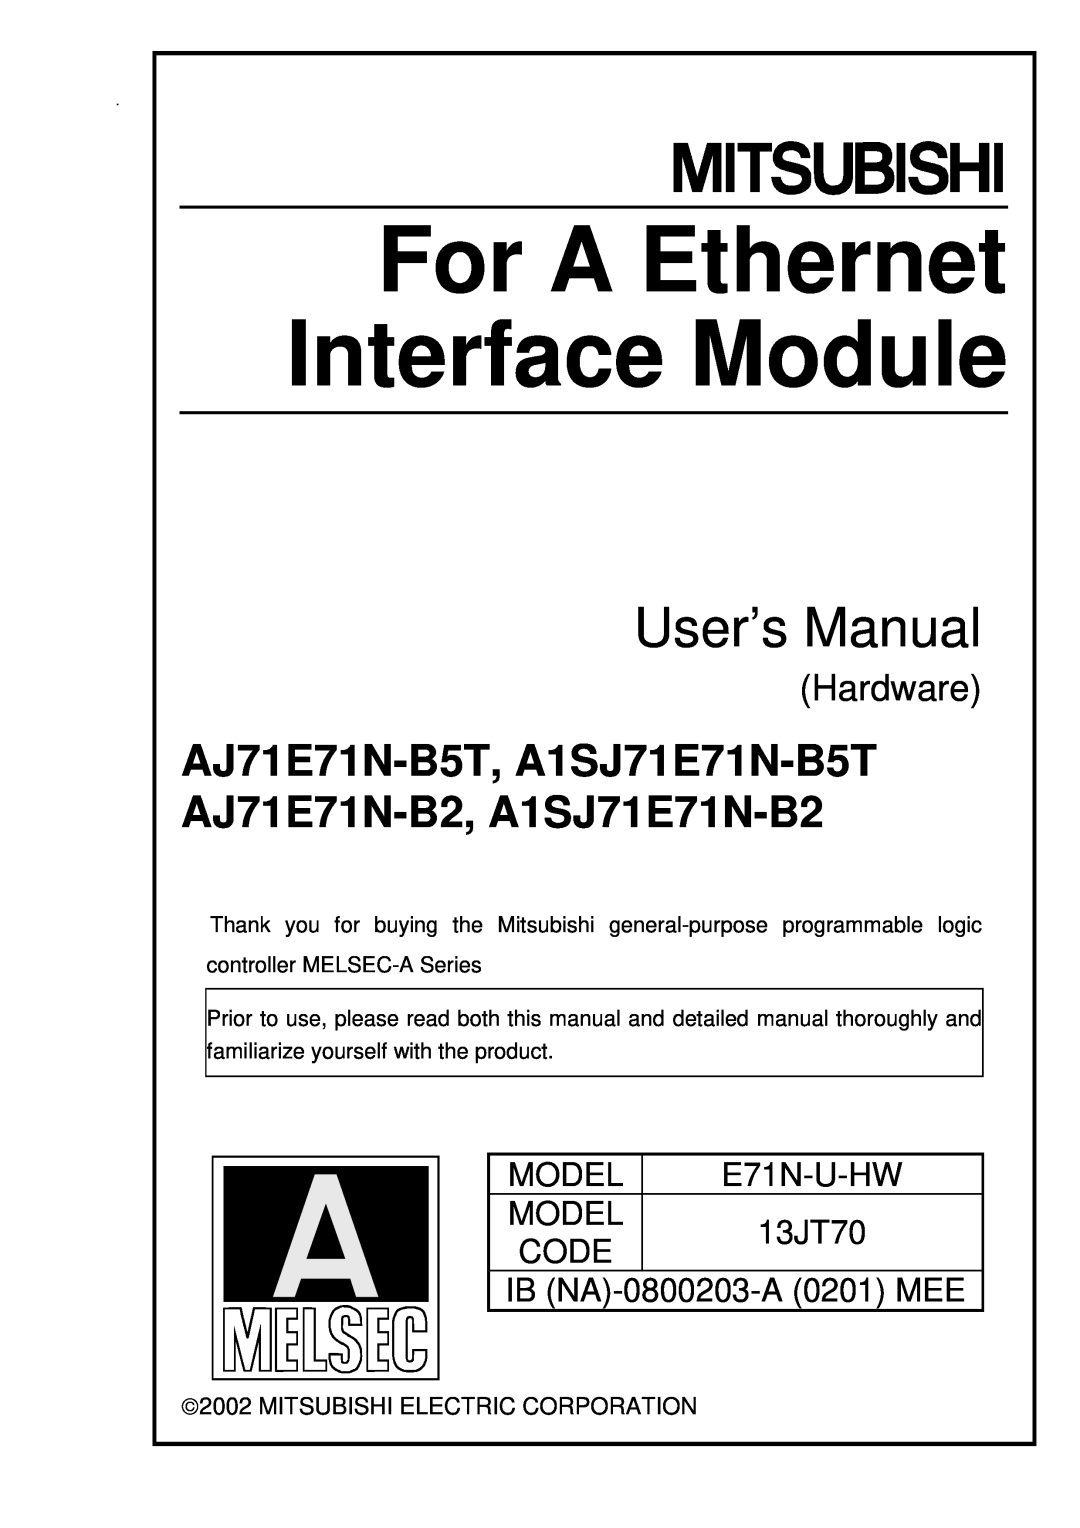 Mitsubishi A1SJ71E71N-B5T, E71N-U-HW, AJ71E71N-B2 user manual Hardware, For A Ethernet Interface Module, User’s Manual 